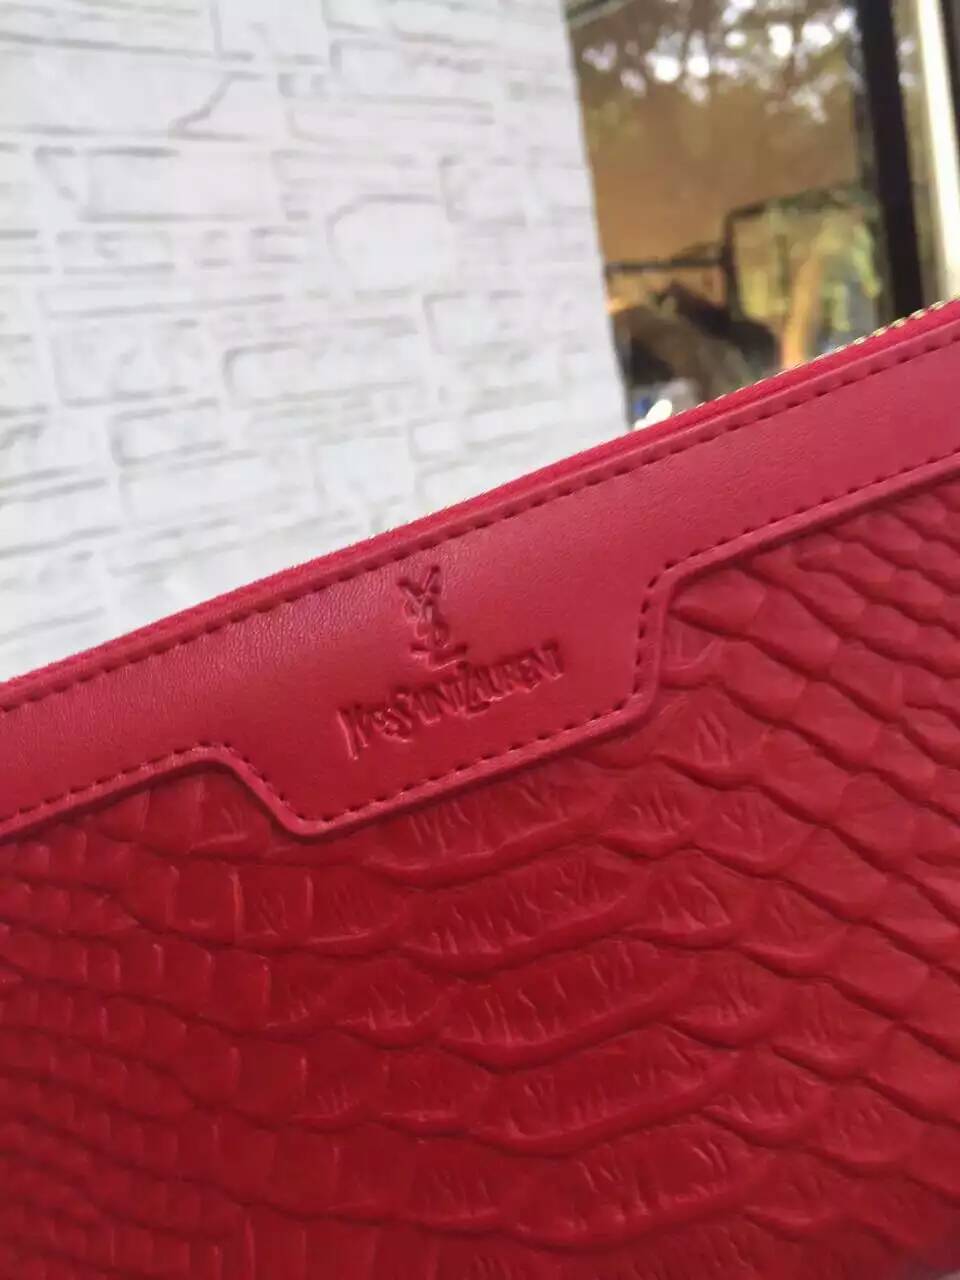 2016 Saint Laurent Bags Cheap Sale-Saint Laurent Zippy Around Wallet in Red Python Embossed Calfskin Leather - Click Image to Close